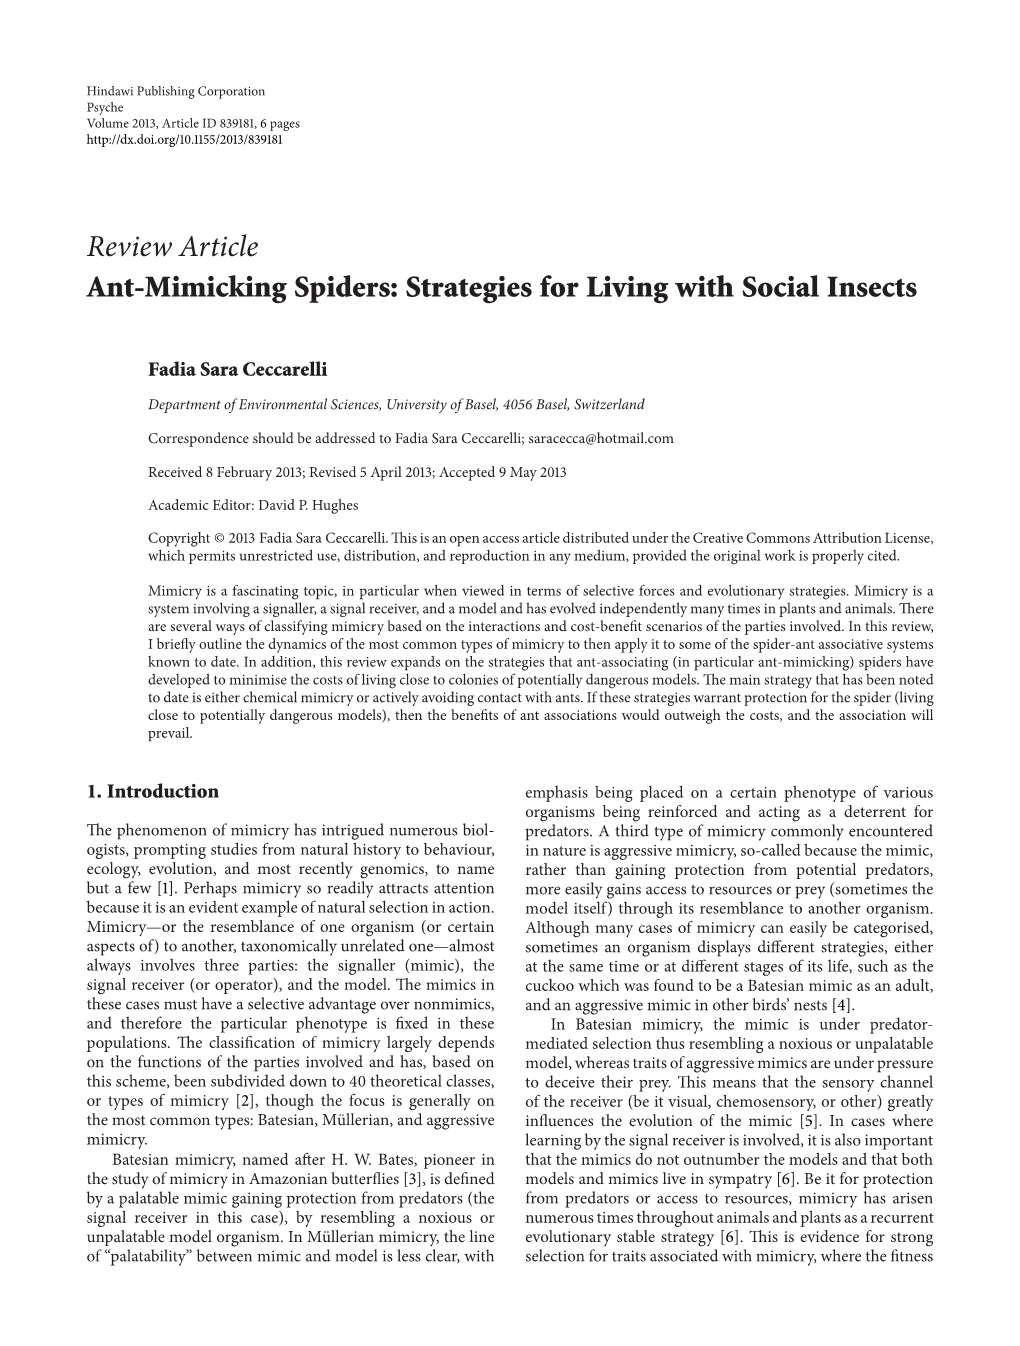 Ant-Mimicking Spiders: Strategies for Living with Social Insects